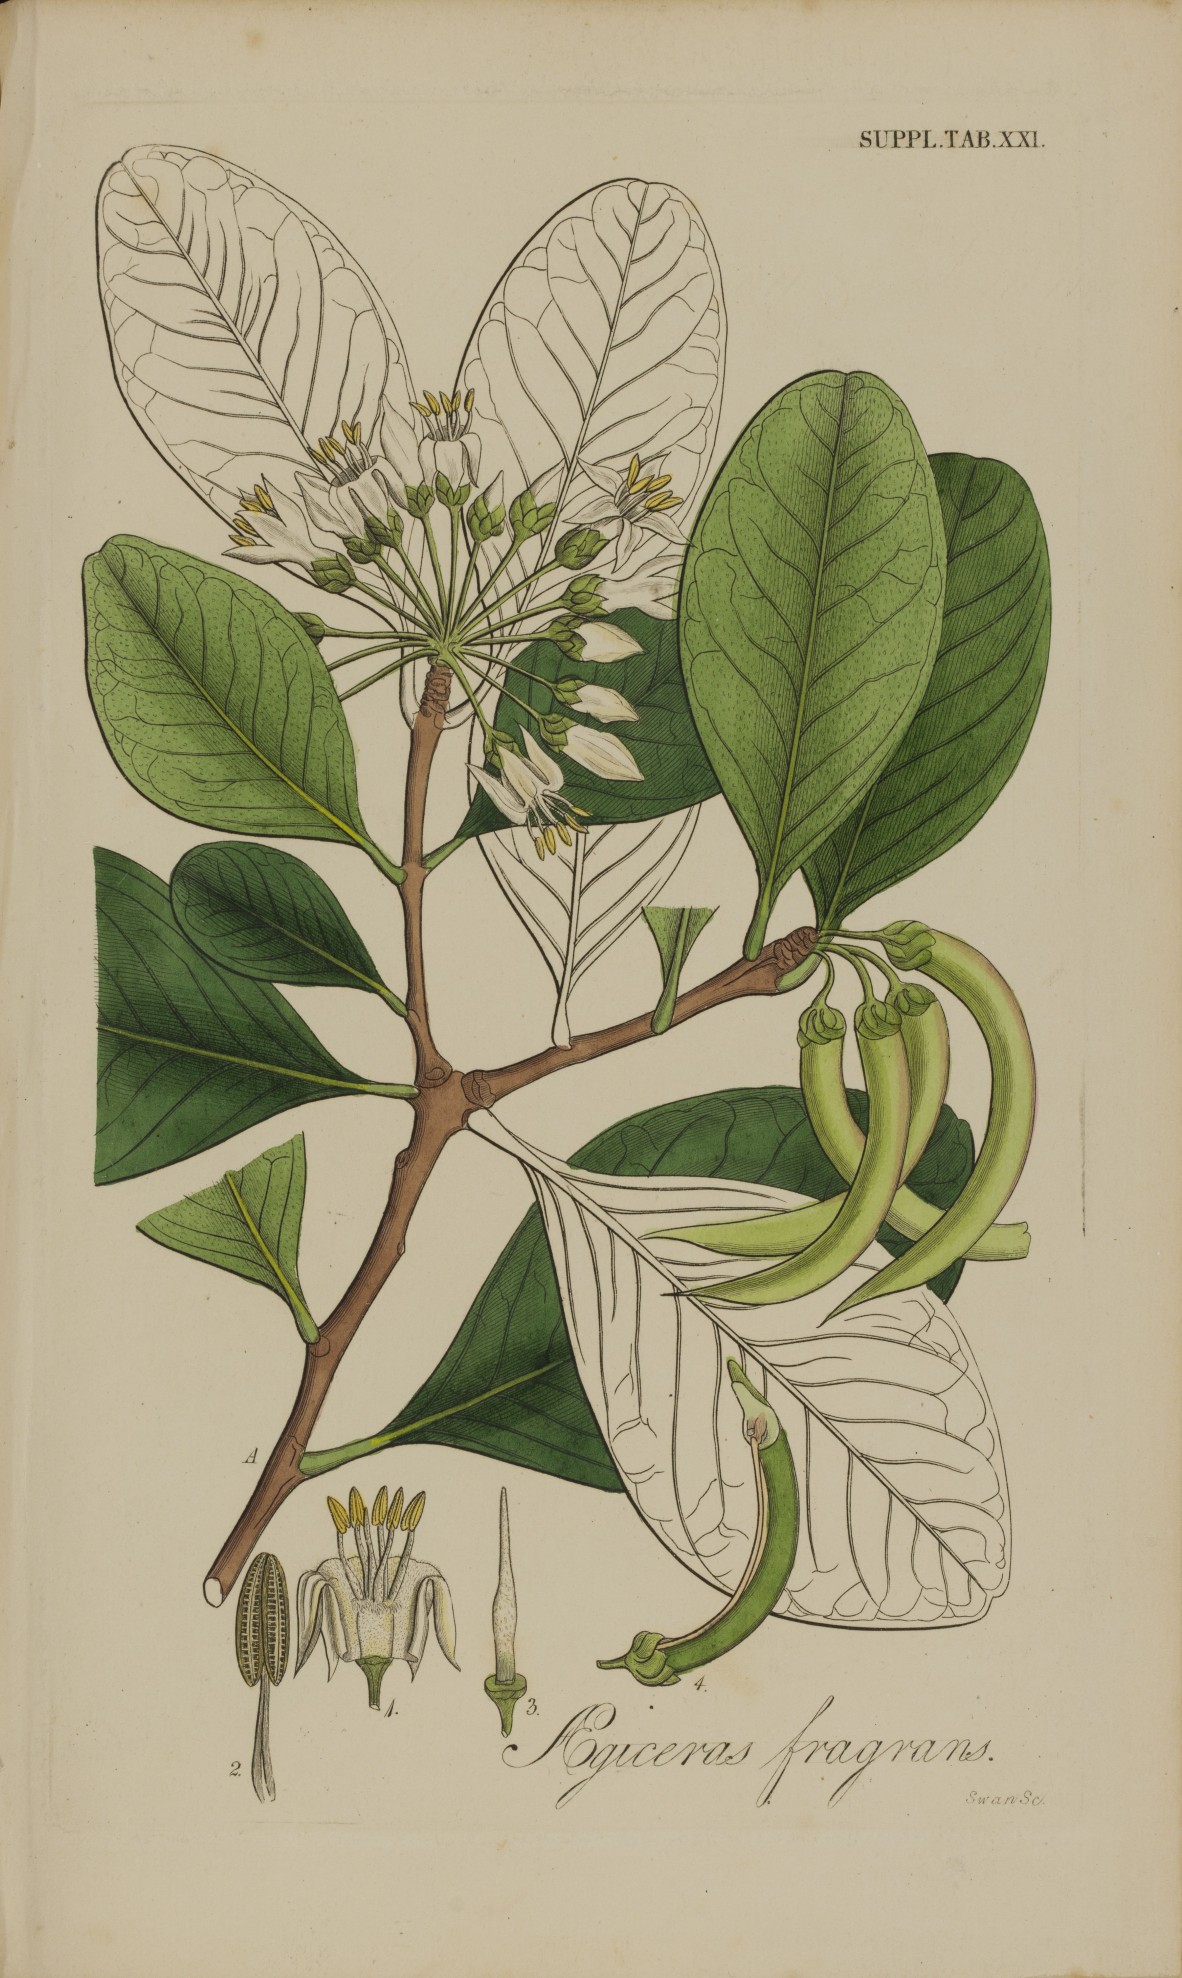 River mangrove from Botanical miscellany vol. 5